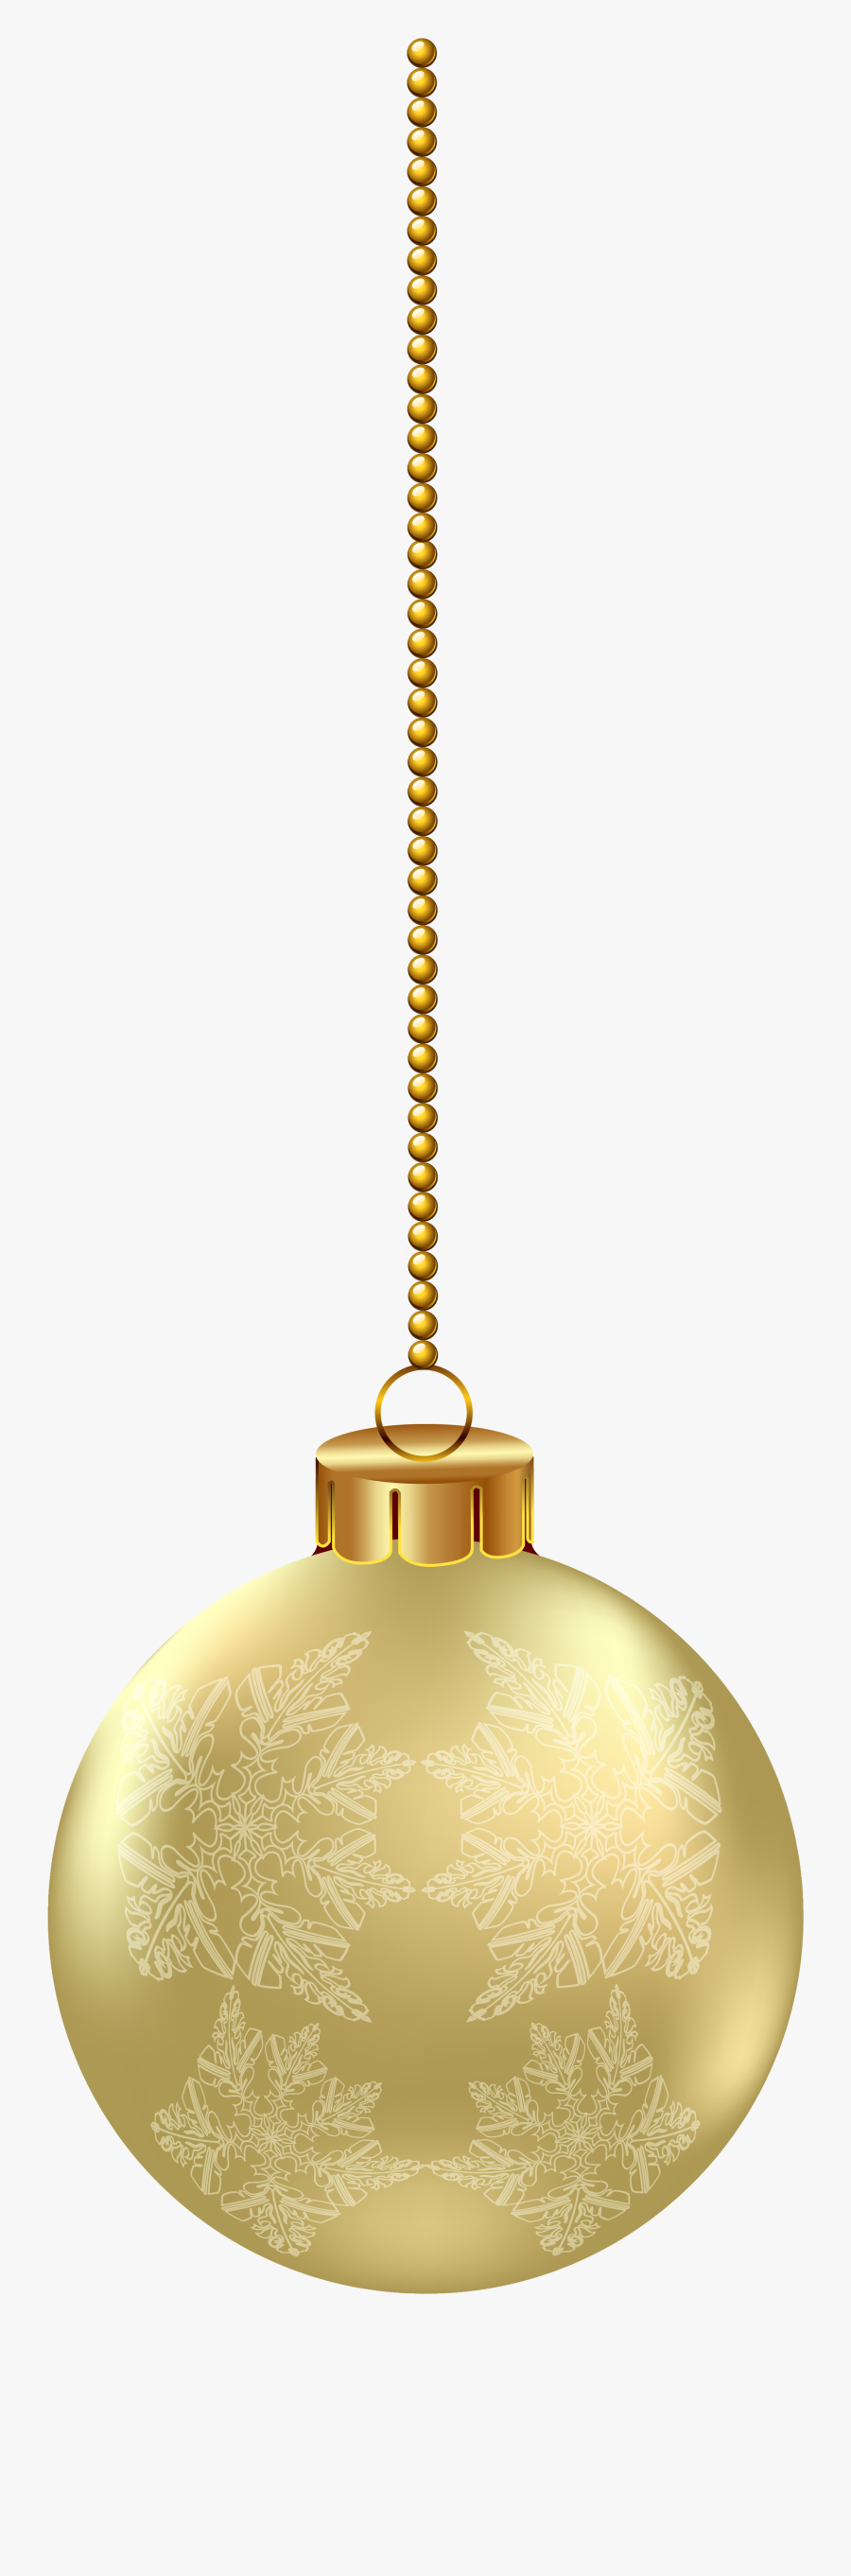 Hanging Christmas Ornament Png Clipart Image - Hanging Christmas Decoration Png, Transparent Clipart